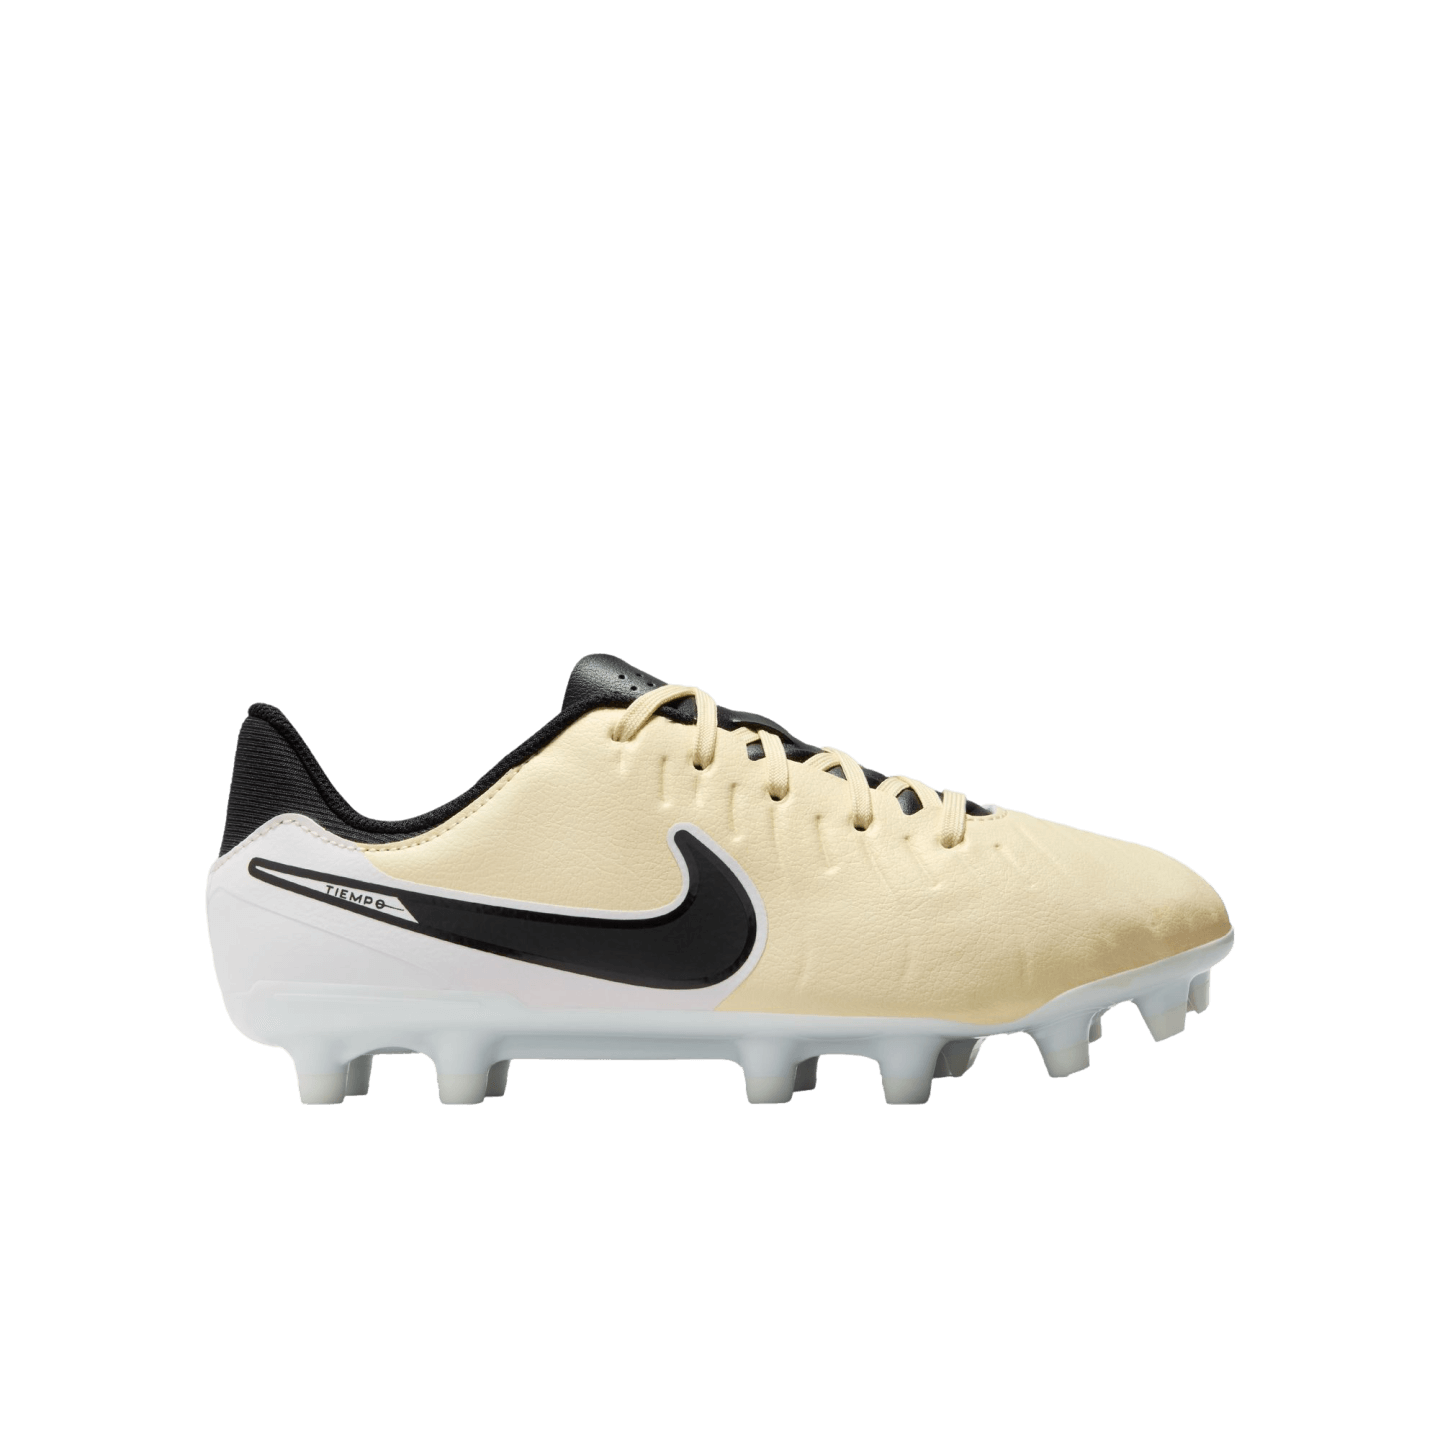 Nike Tiempo Legend 10 Academy Youth Firm Ground Cleats